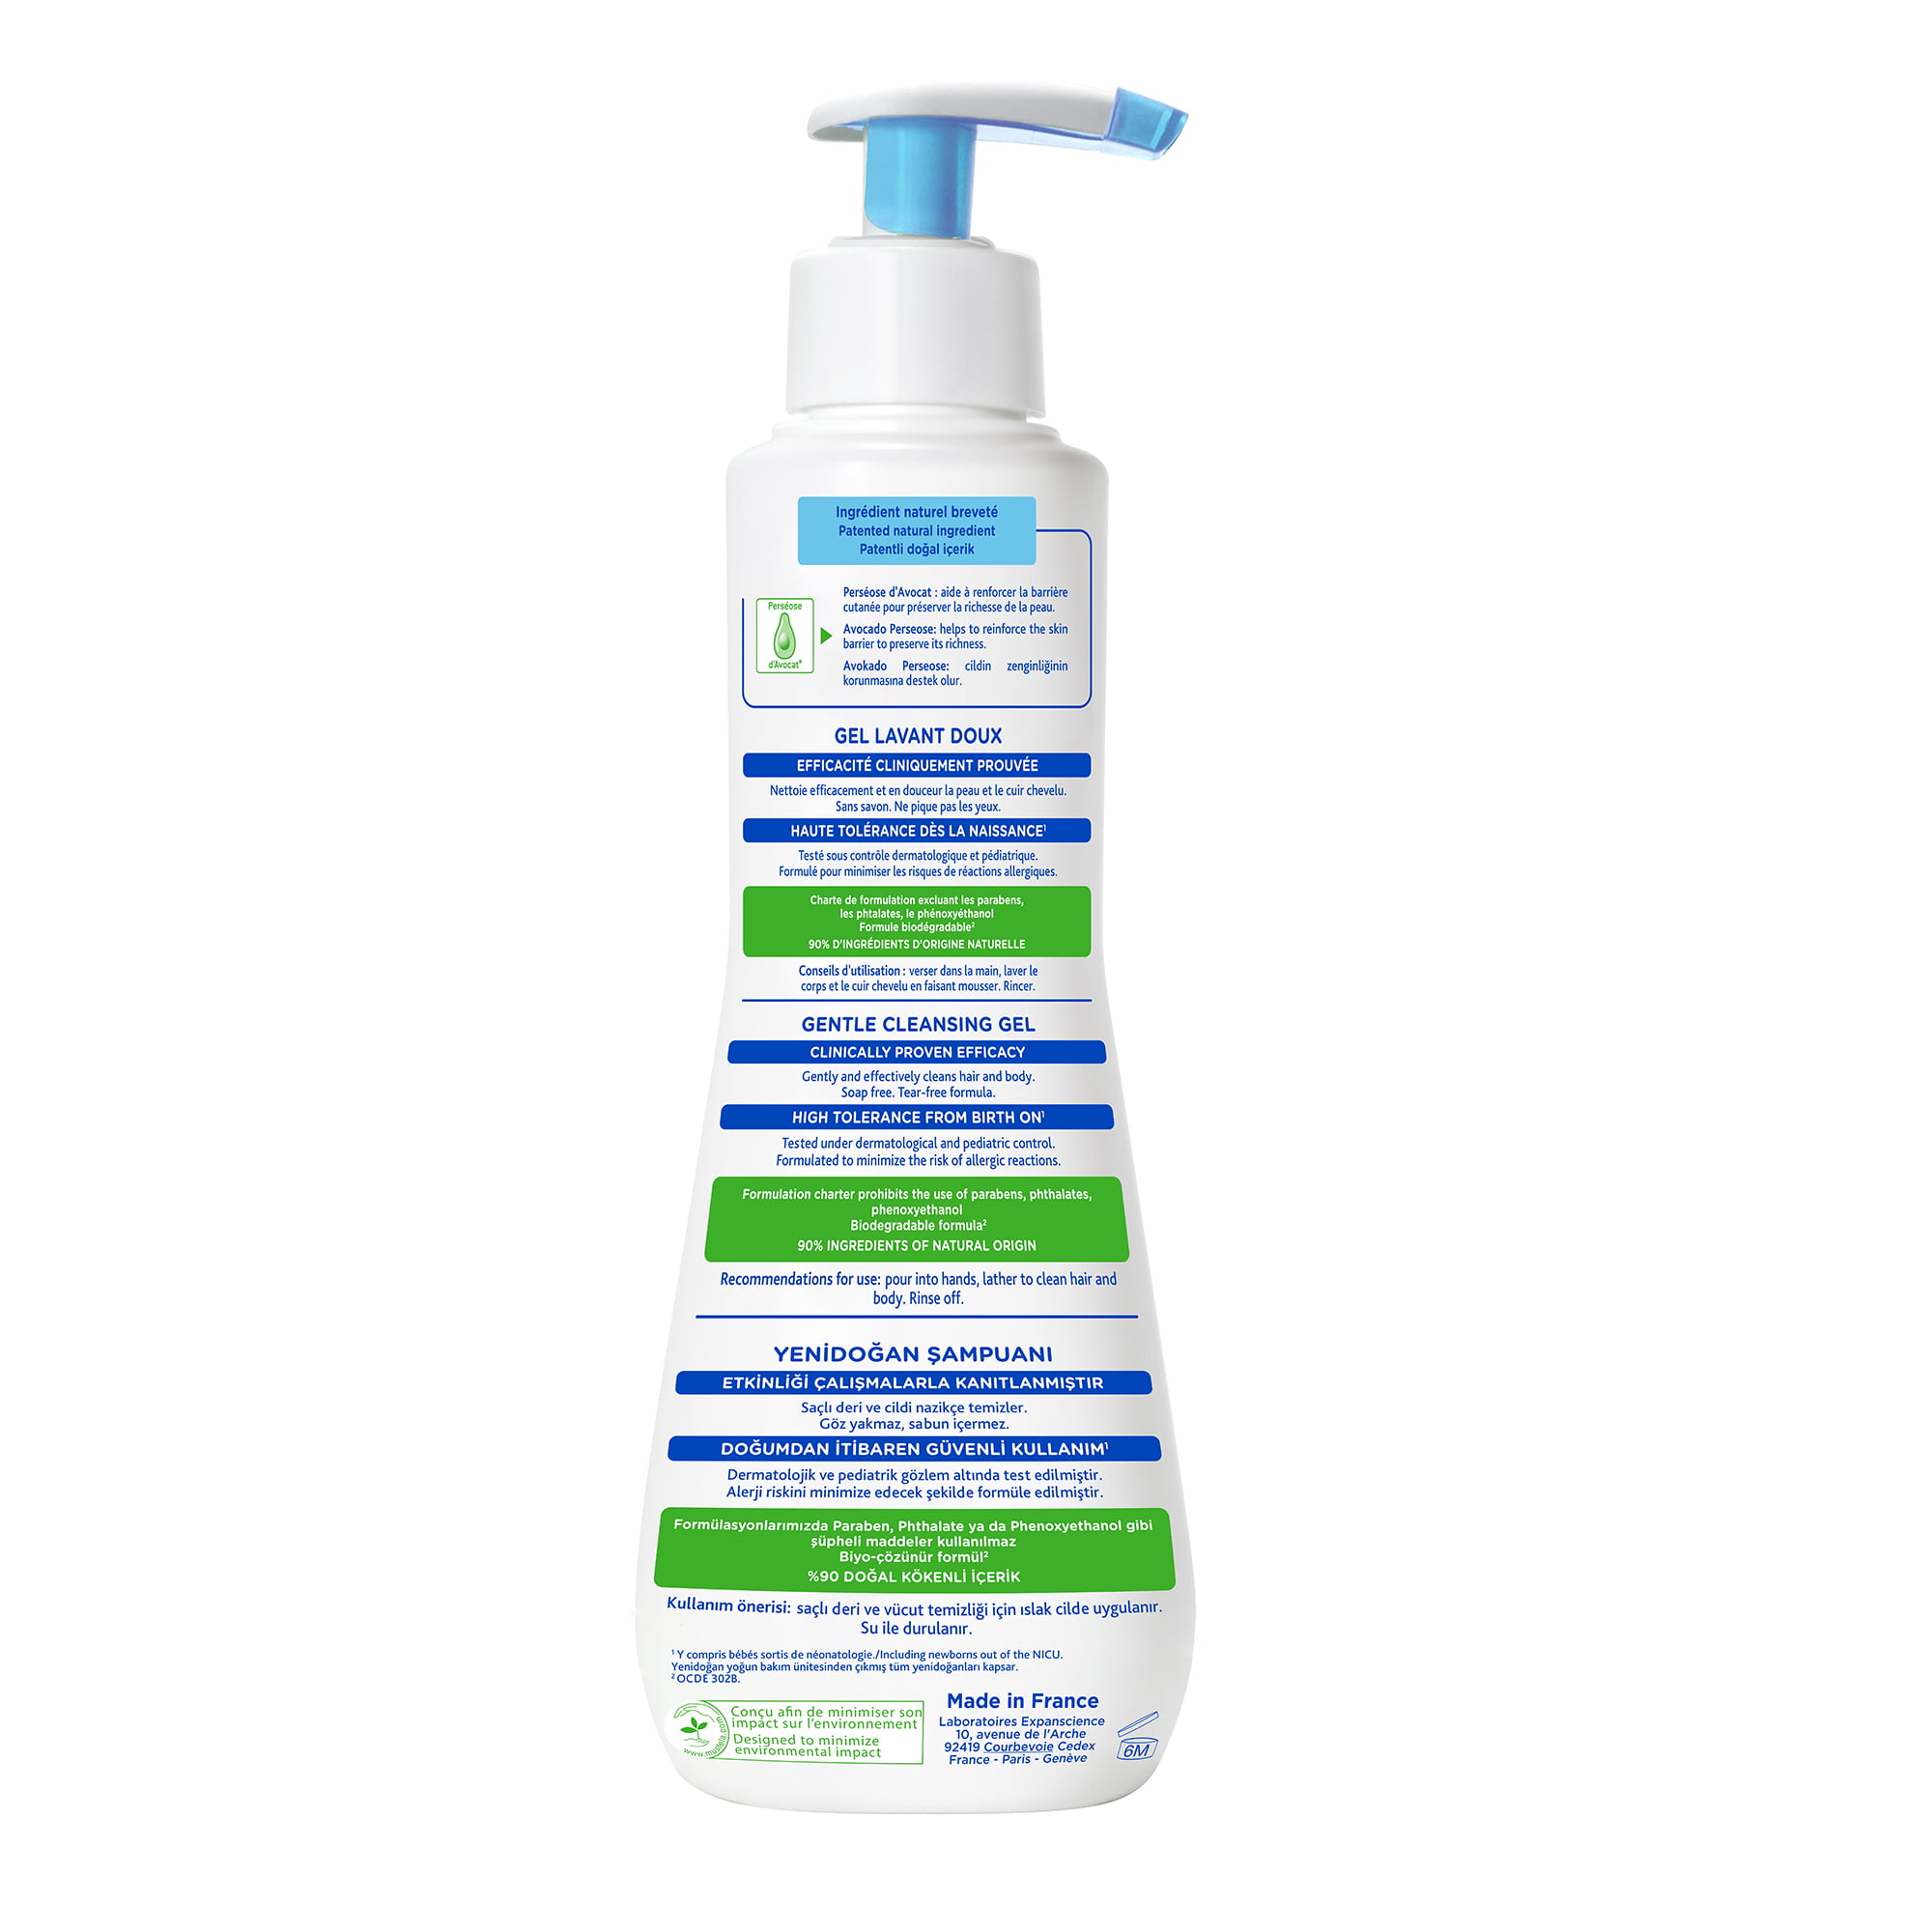 Mustela Baby Gentle Cleansing Gel, Hair and Body Wash with Natural Avocado  Perseose, 25.35 fl oz 